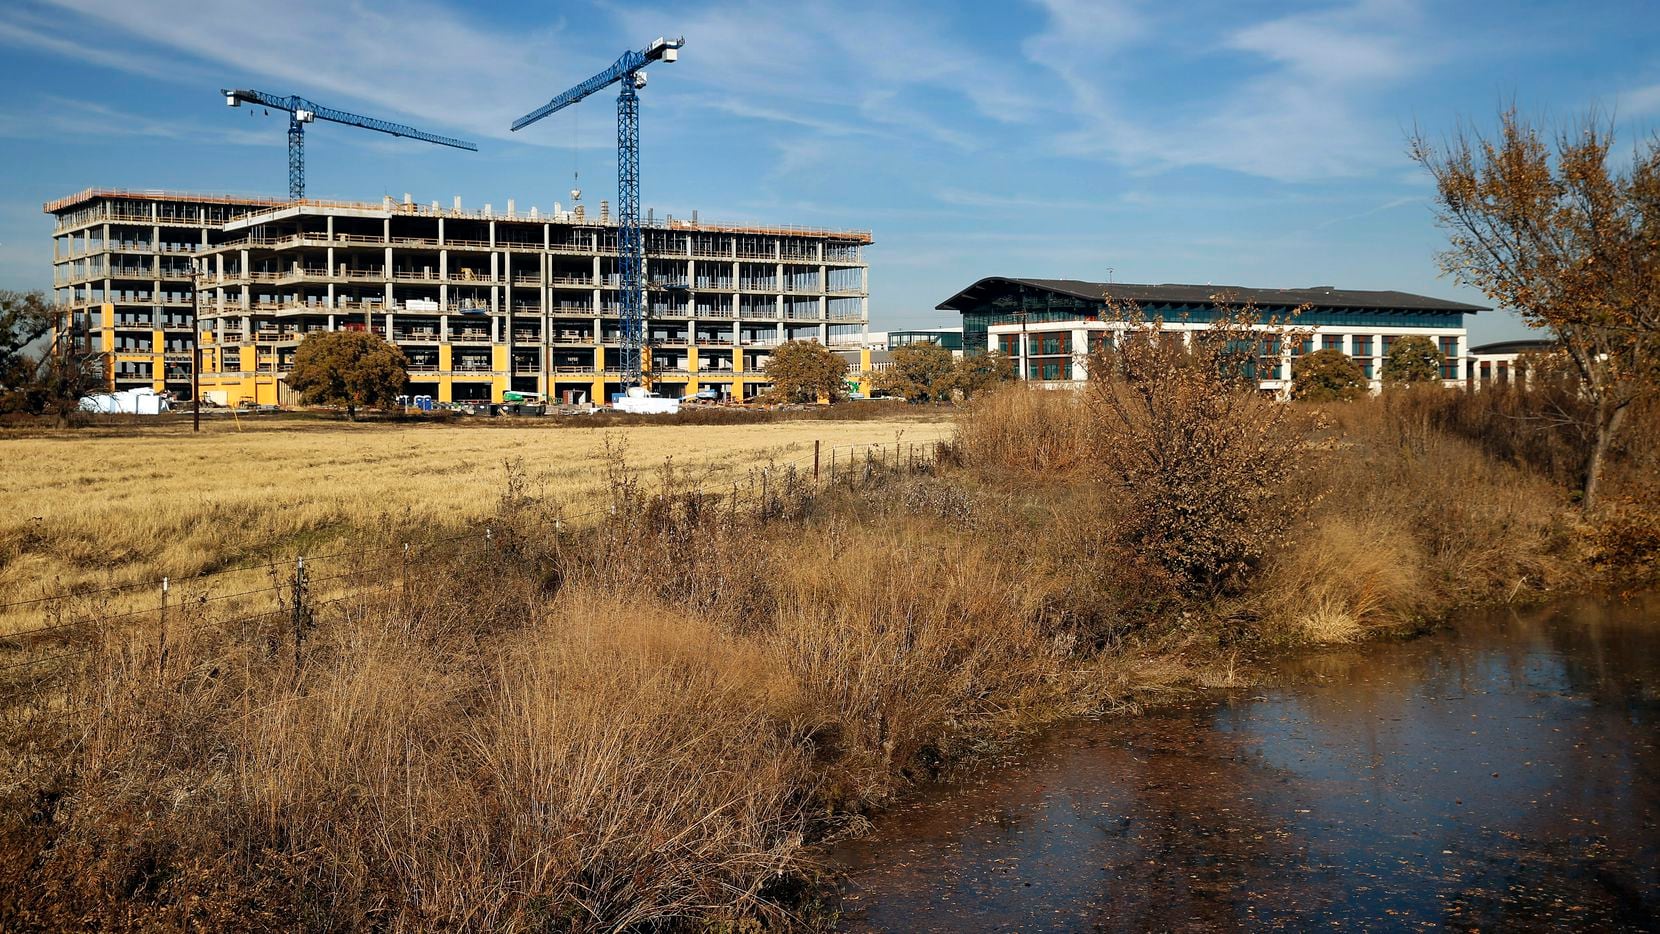 The financial services firm Charles Schwab & Co. is building a new corporate campus in...